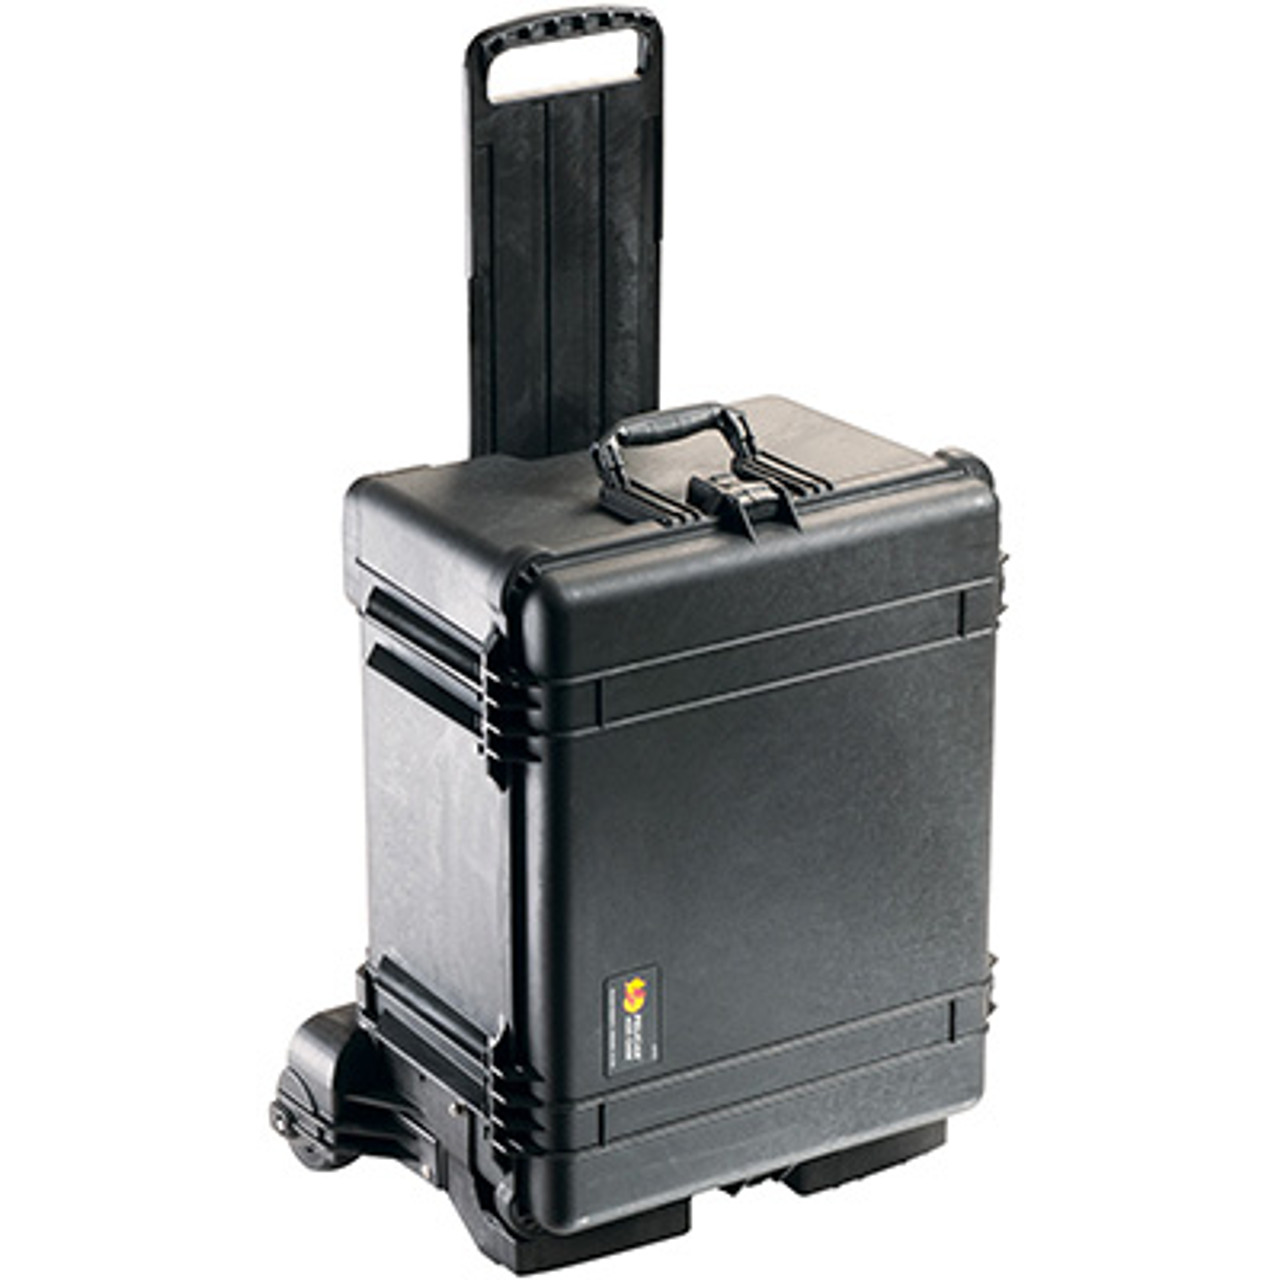 Pelican 1620 Mobility Protector Case